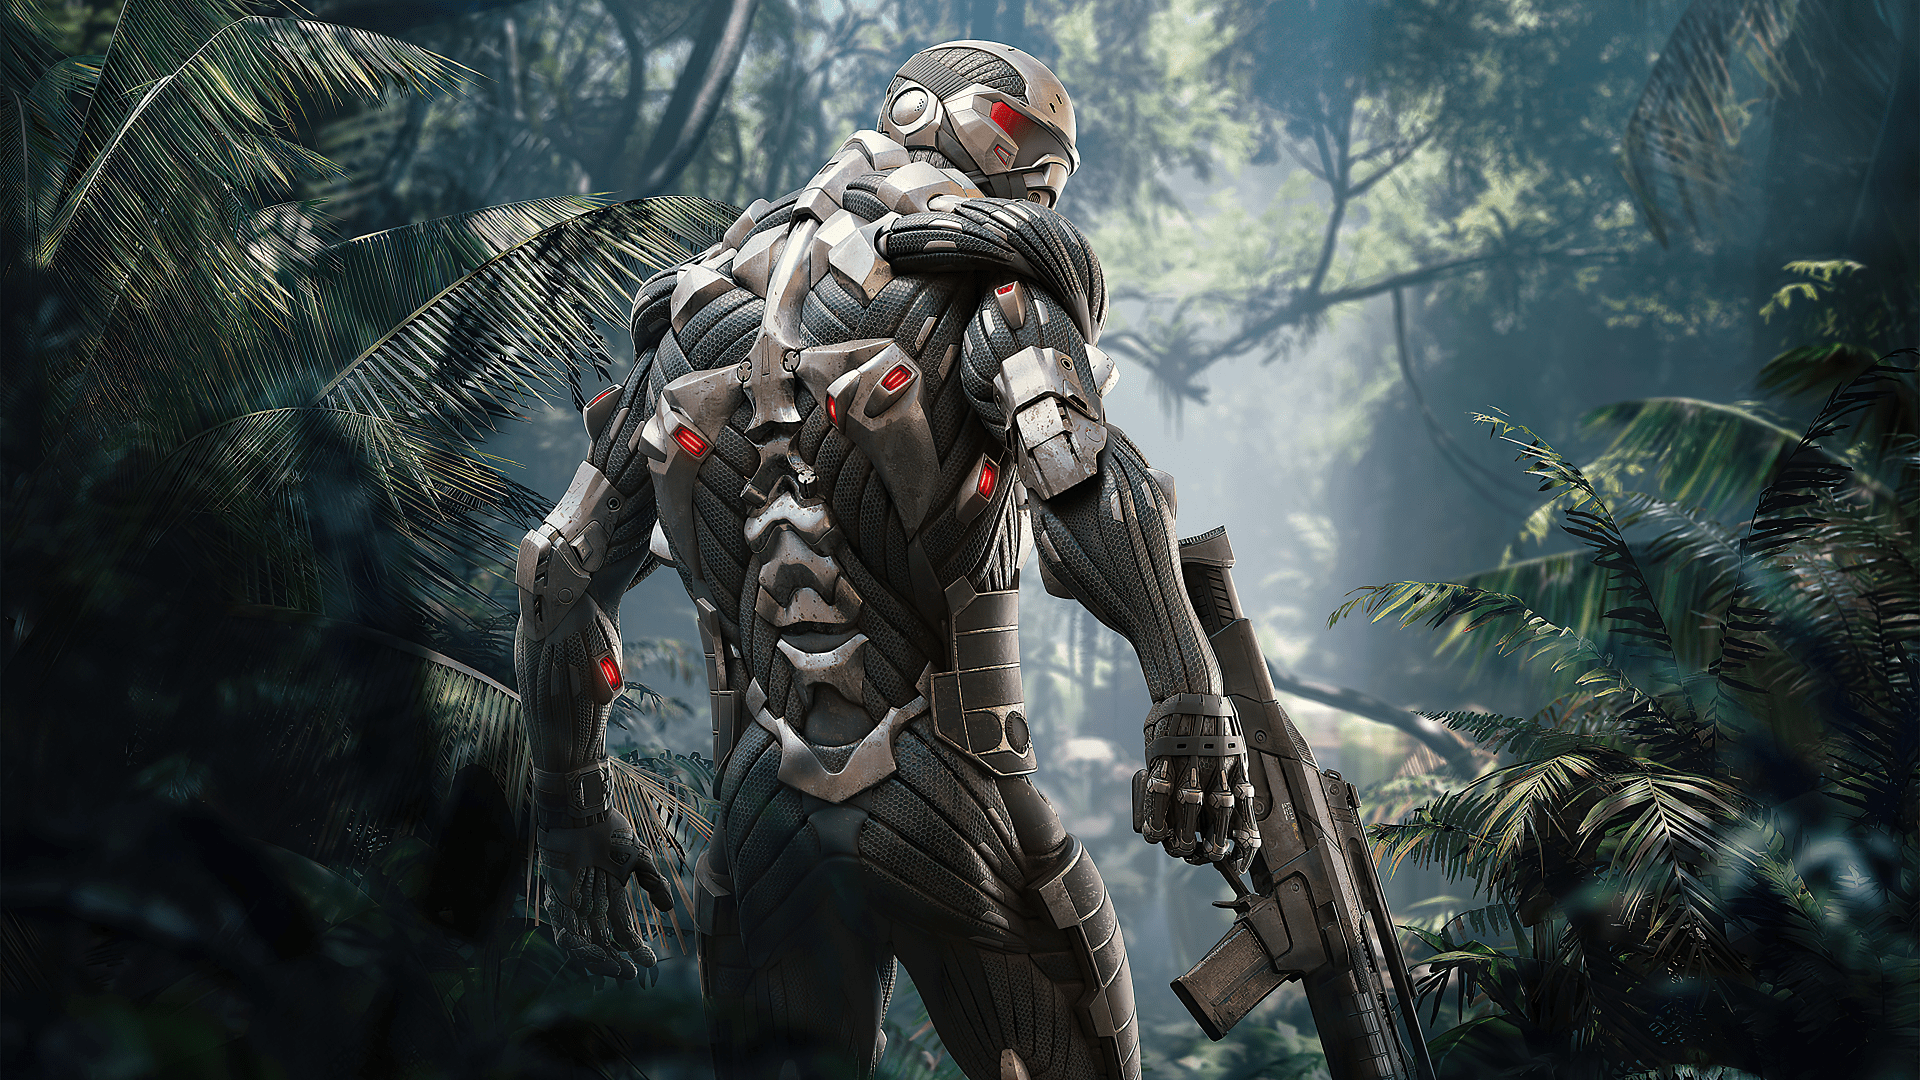 Crysis Remastered cracked